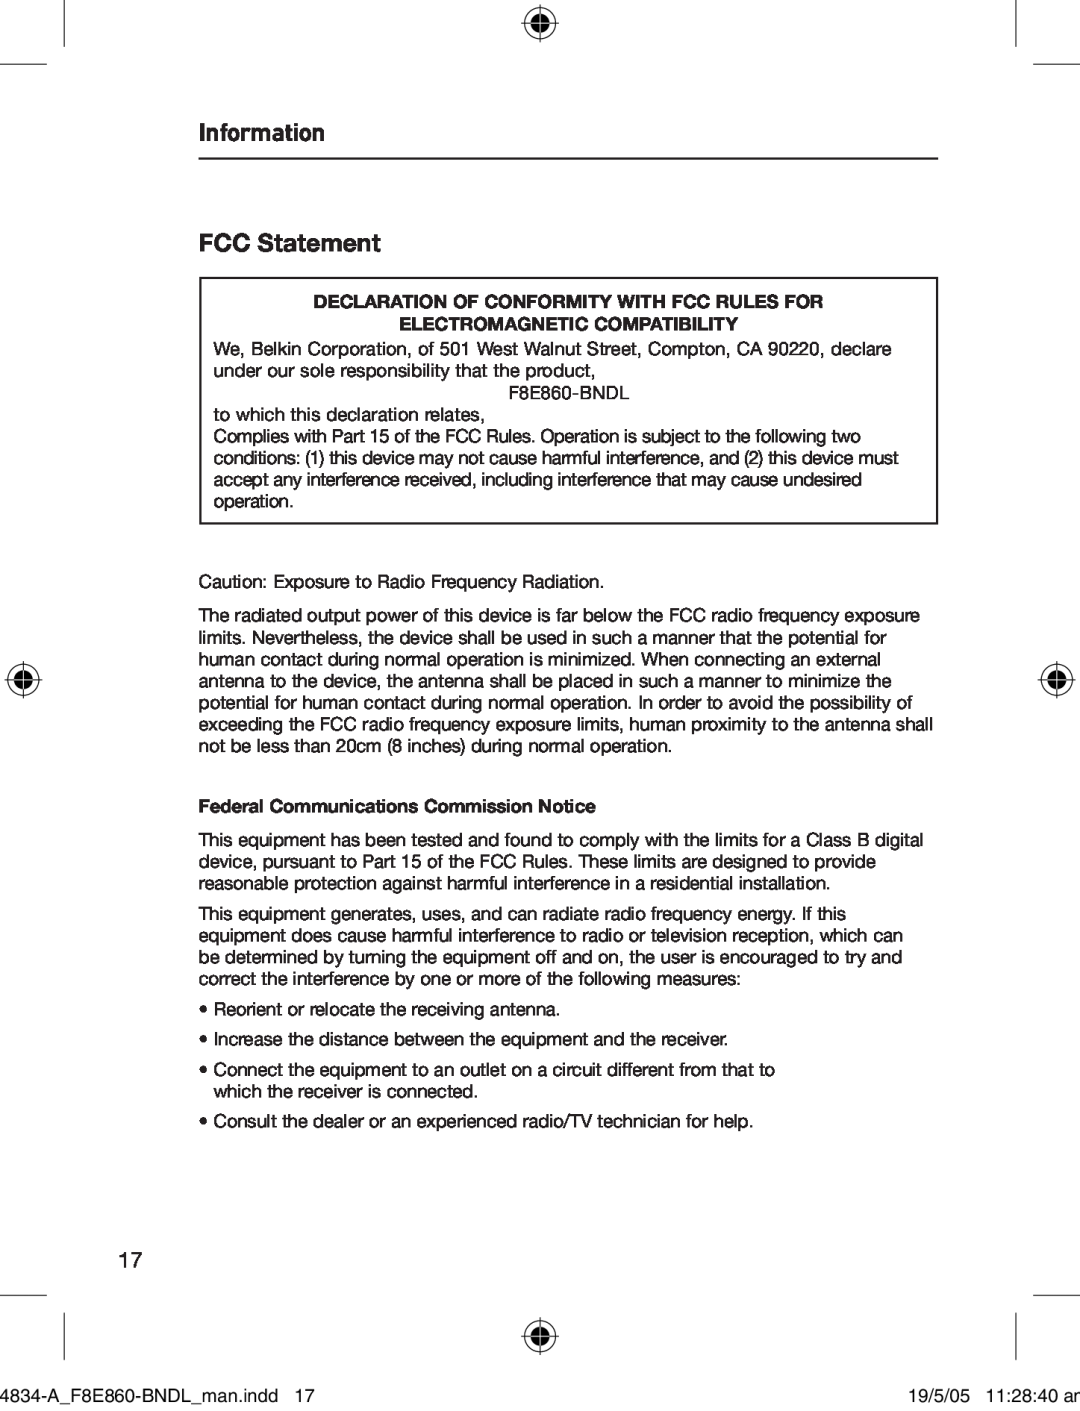 Belkin F8E860-BNDL Information FCC Statement, Declaration Of Conformity With Fcc Rules For, Electromagnetic Compatibility 